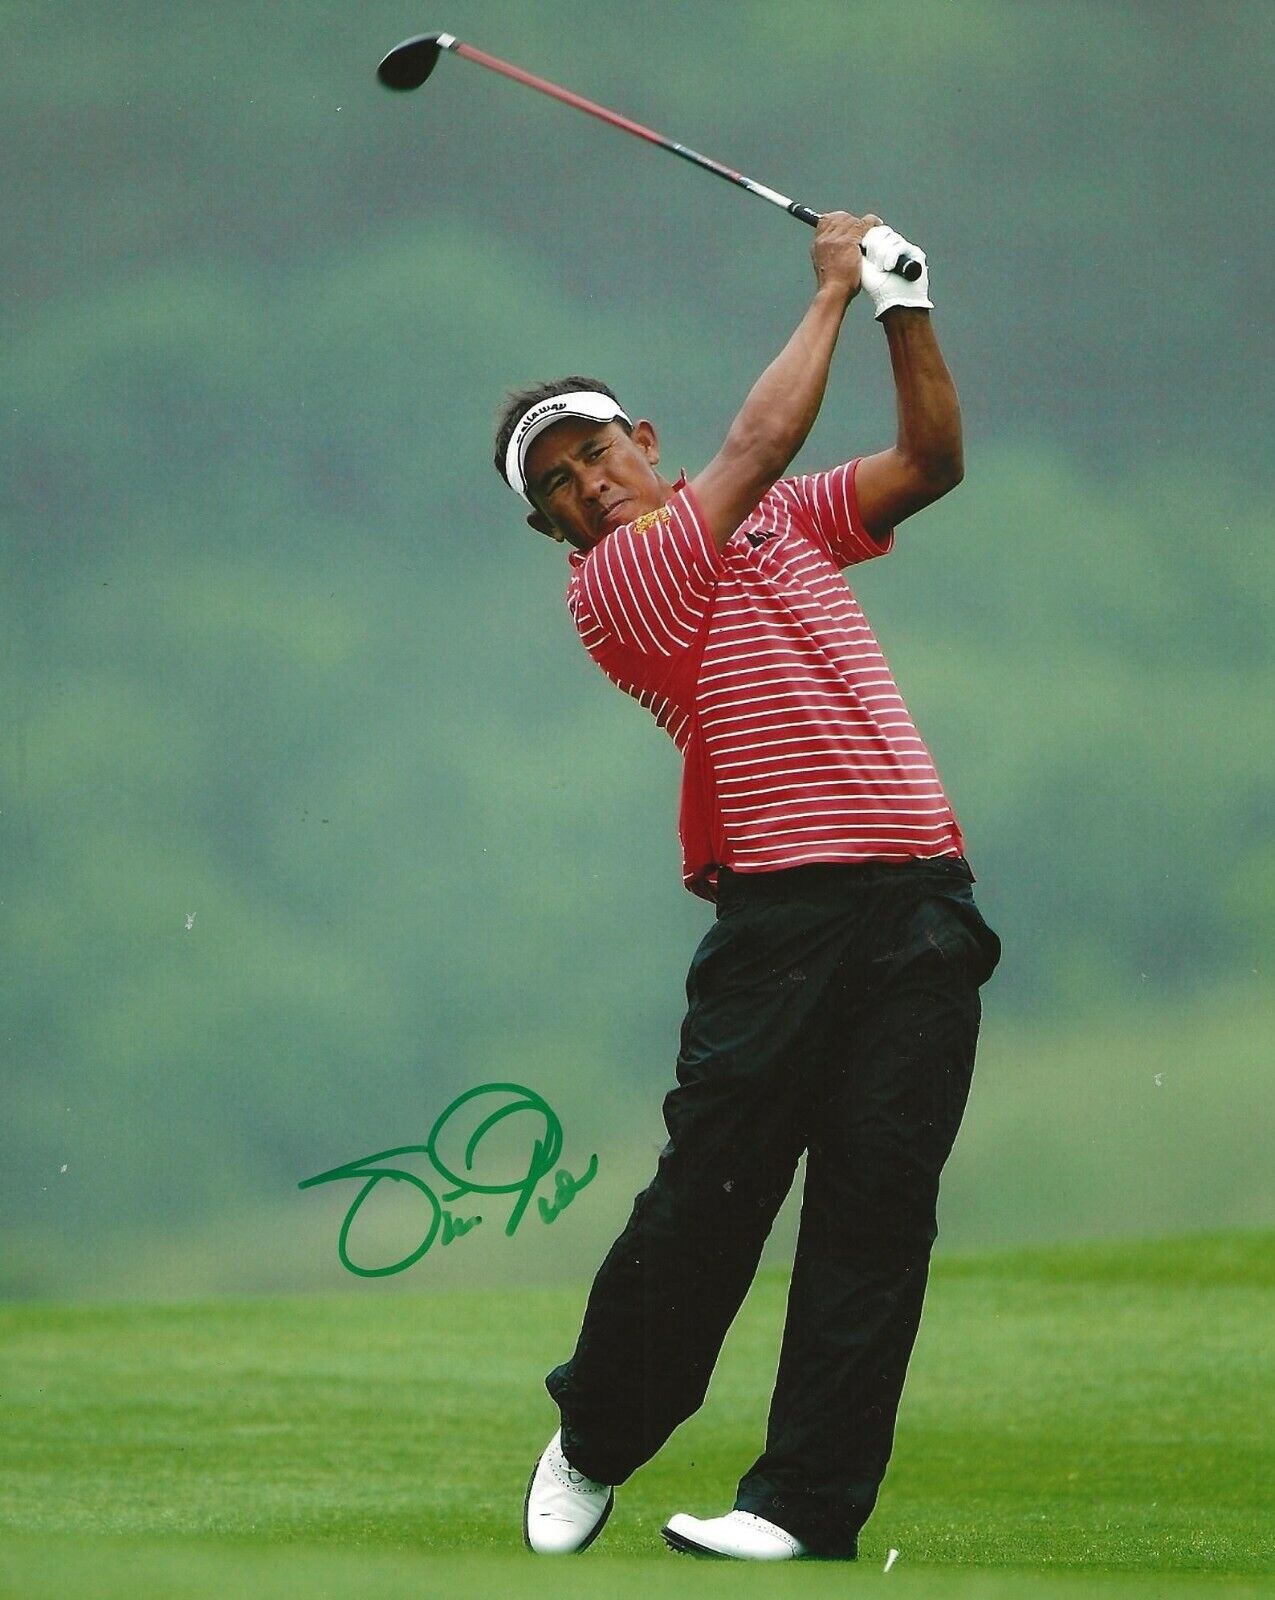 Thongchai Jaidee Thailand signed Golf 8x10 Photo Poster painting autographed